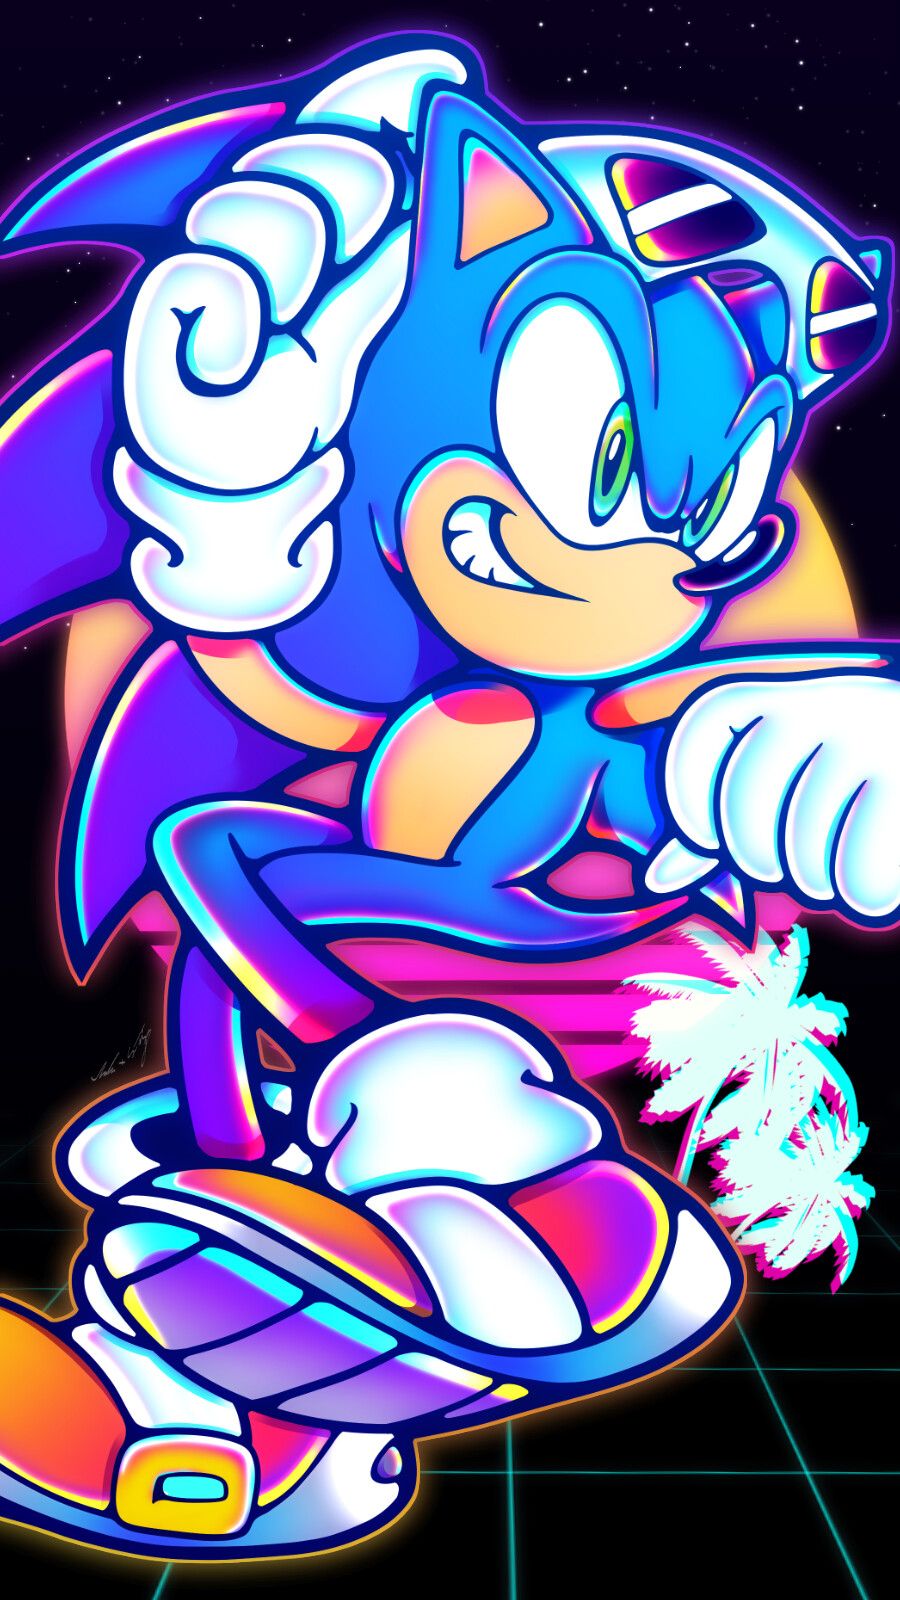 Made a mobile wallpaper from the Sonic the Hedgehog 2 poster  riWallpaper